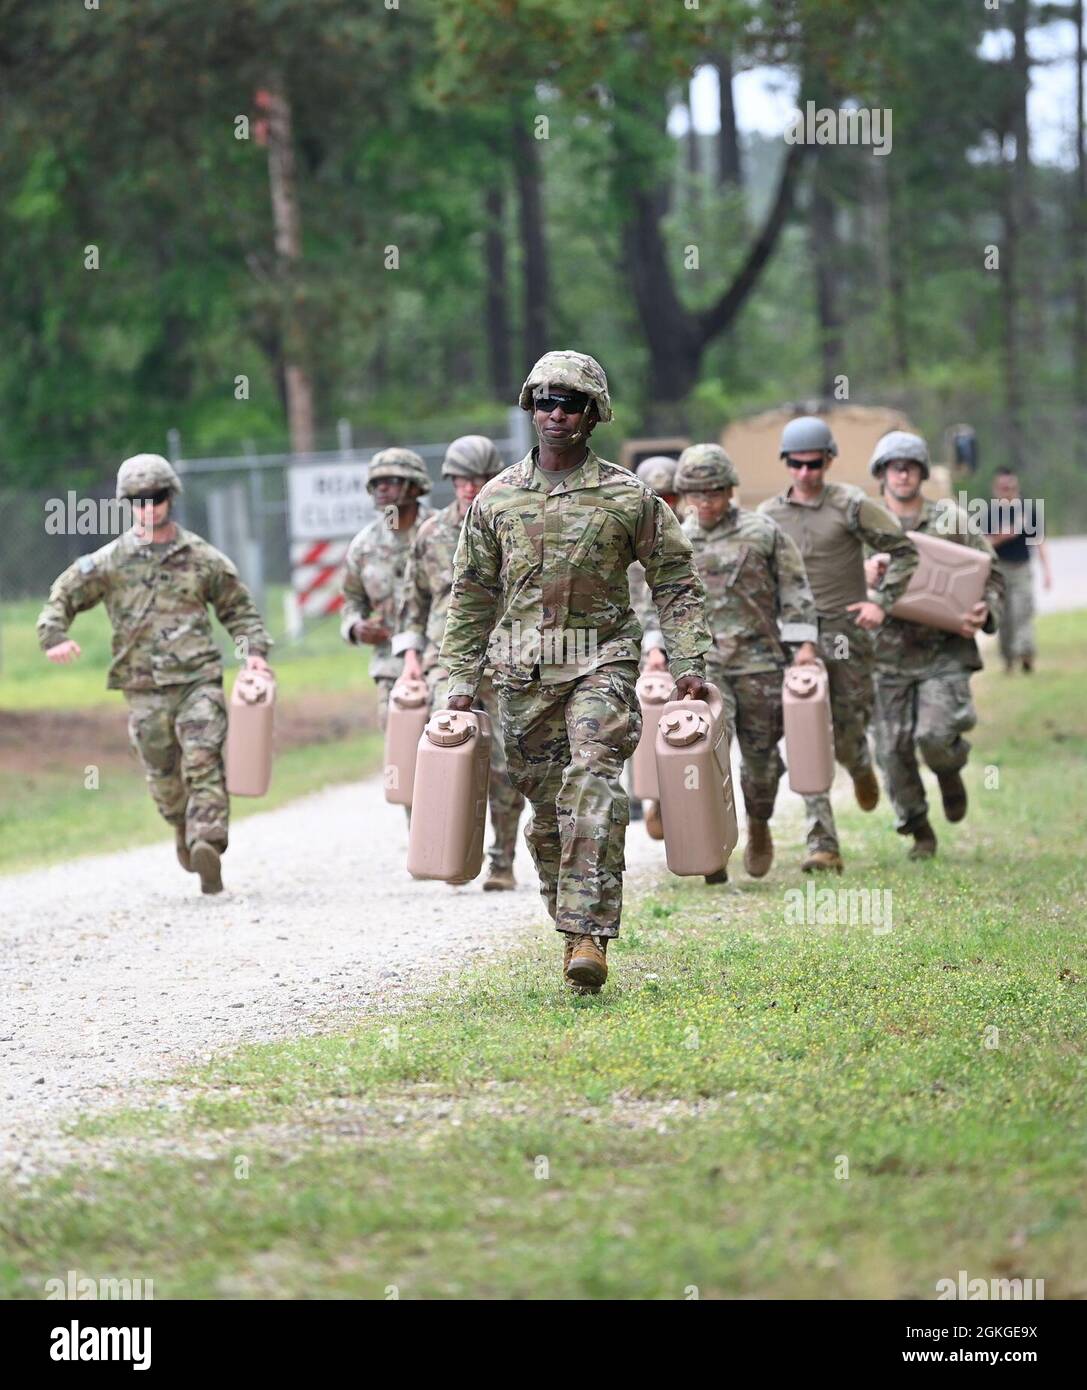 Soldiers from Support Battalion, 1st Special Warfare Training Group (Airborne) carry water cans as part of a stress-shoot during the battalion's Commander's Cup competition at Fort Bragg, North Carolina April 15, 2021. The Soldiers from each company competed in a ruck march, obstacle course, land navigation, Jeopardy-themed trivia contest and stress shoot with pistols and rifles. Stock Photo